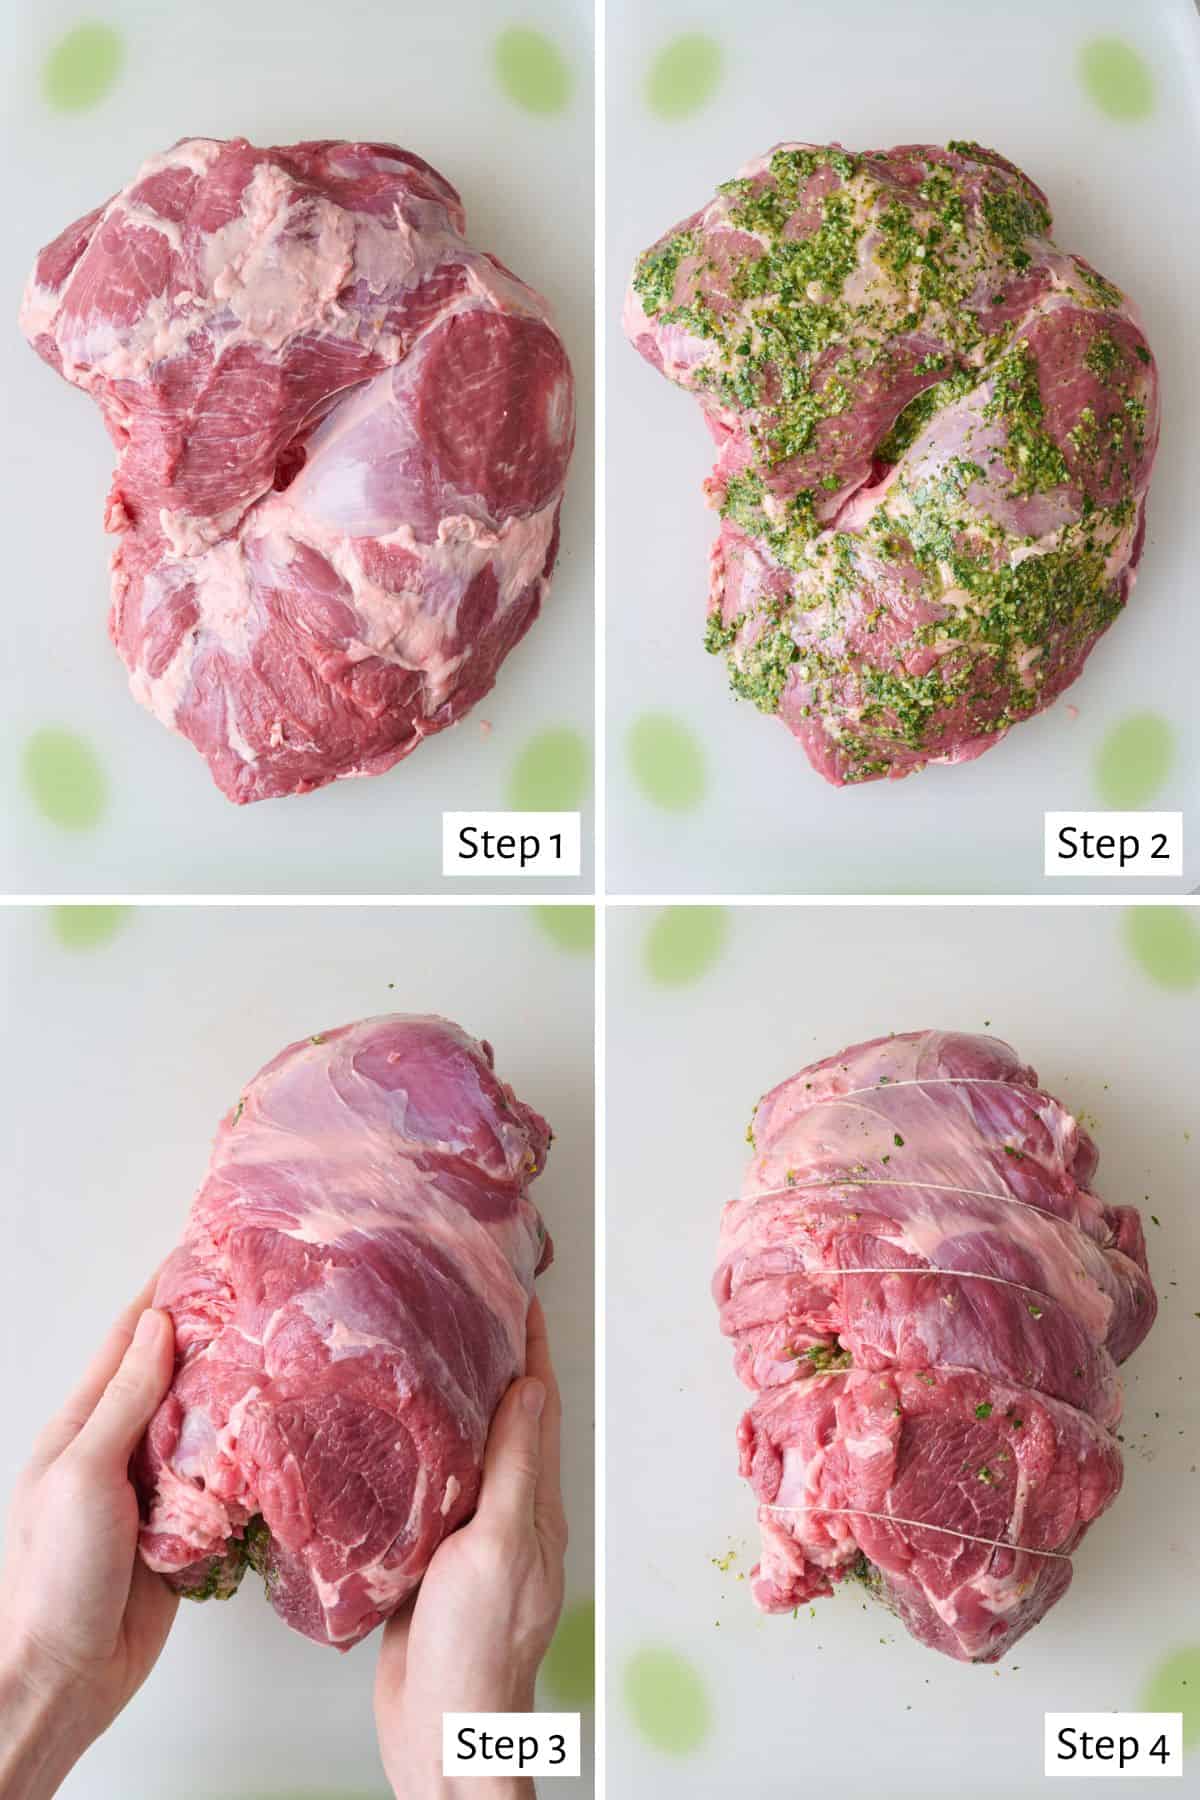 4-image collage preparing lamb: 1 - Lamb unrolled with inside facing up on a cutting board; 2 - After rubbing half of the paste inside; 3 - Rolling back up into a tight roulade; 4 - After adding twine.